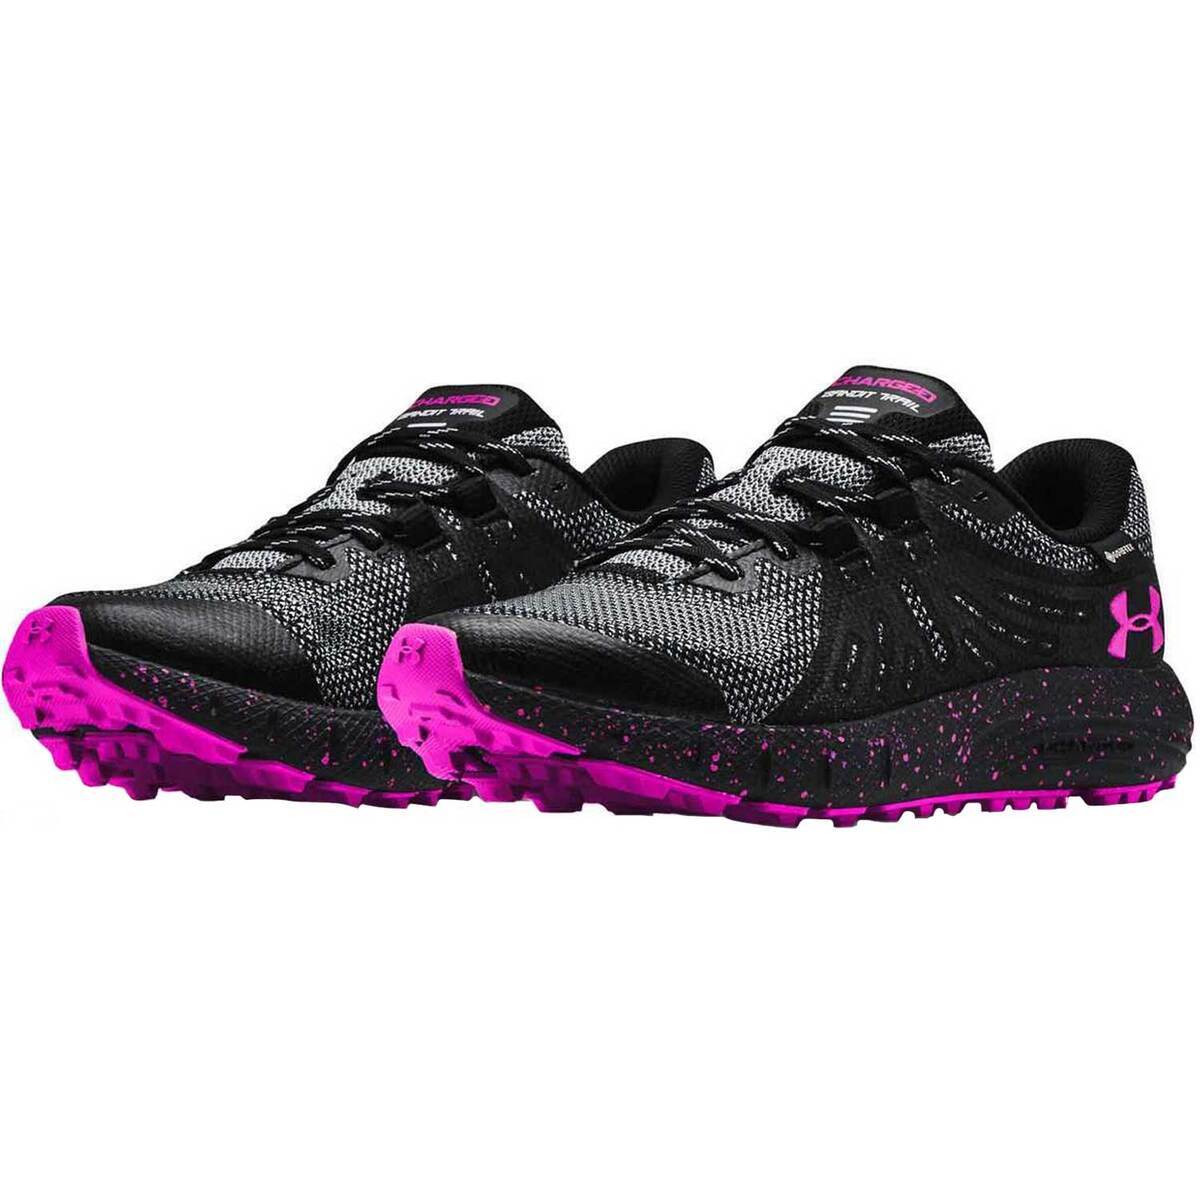 Under Armour Women's Charged Bandit Waterproof Low Trail Running Shoes ...